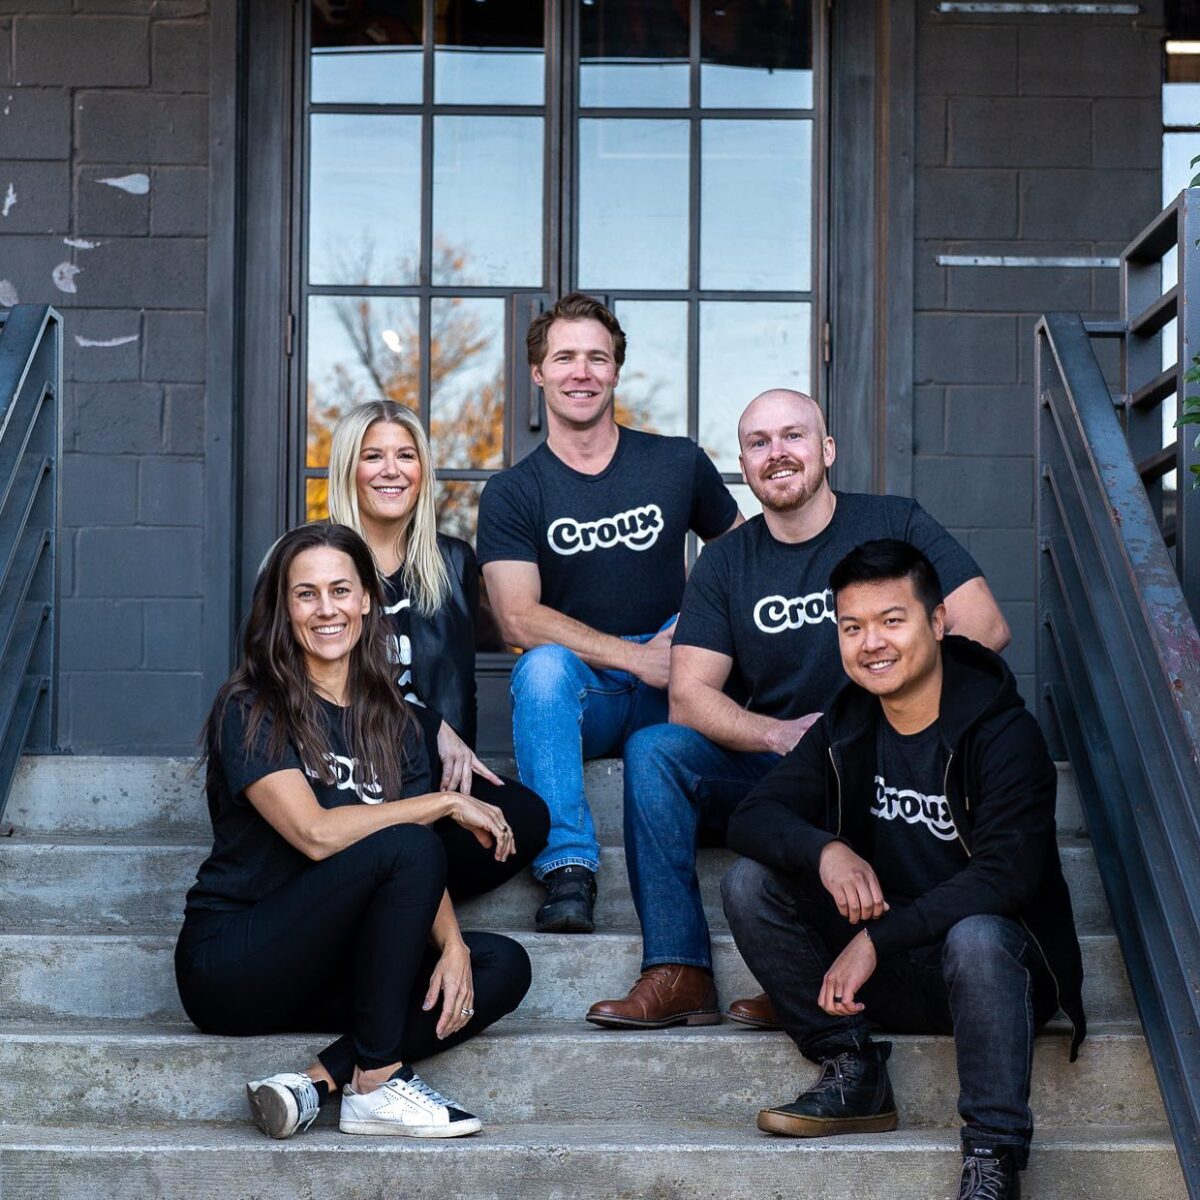 croux facebook New dating app + 3 other Birmingham startups doing big things